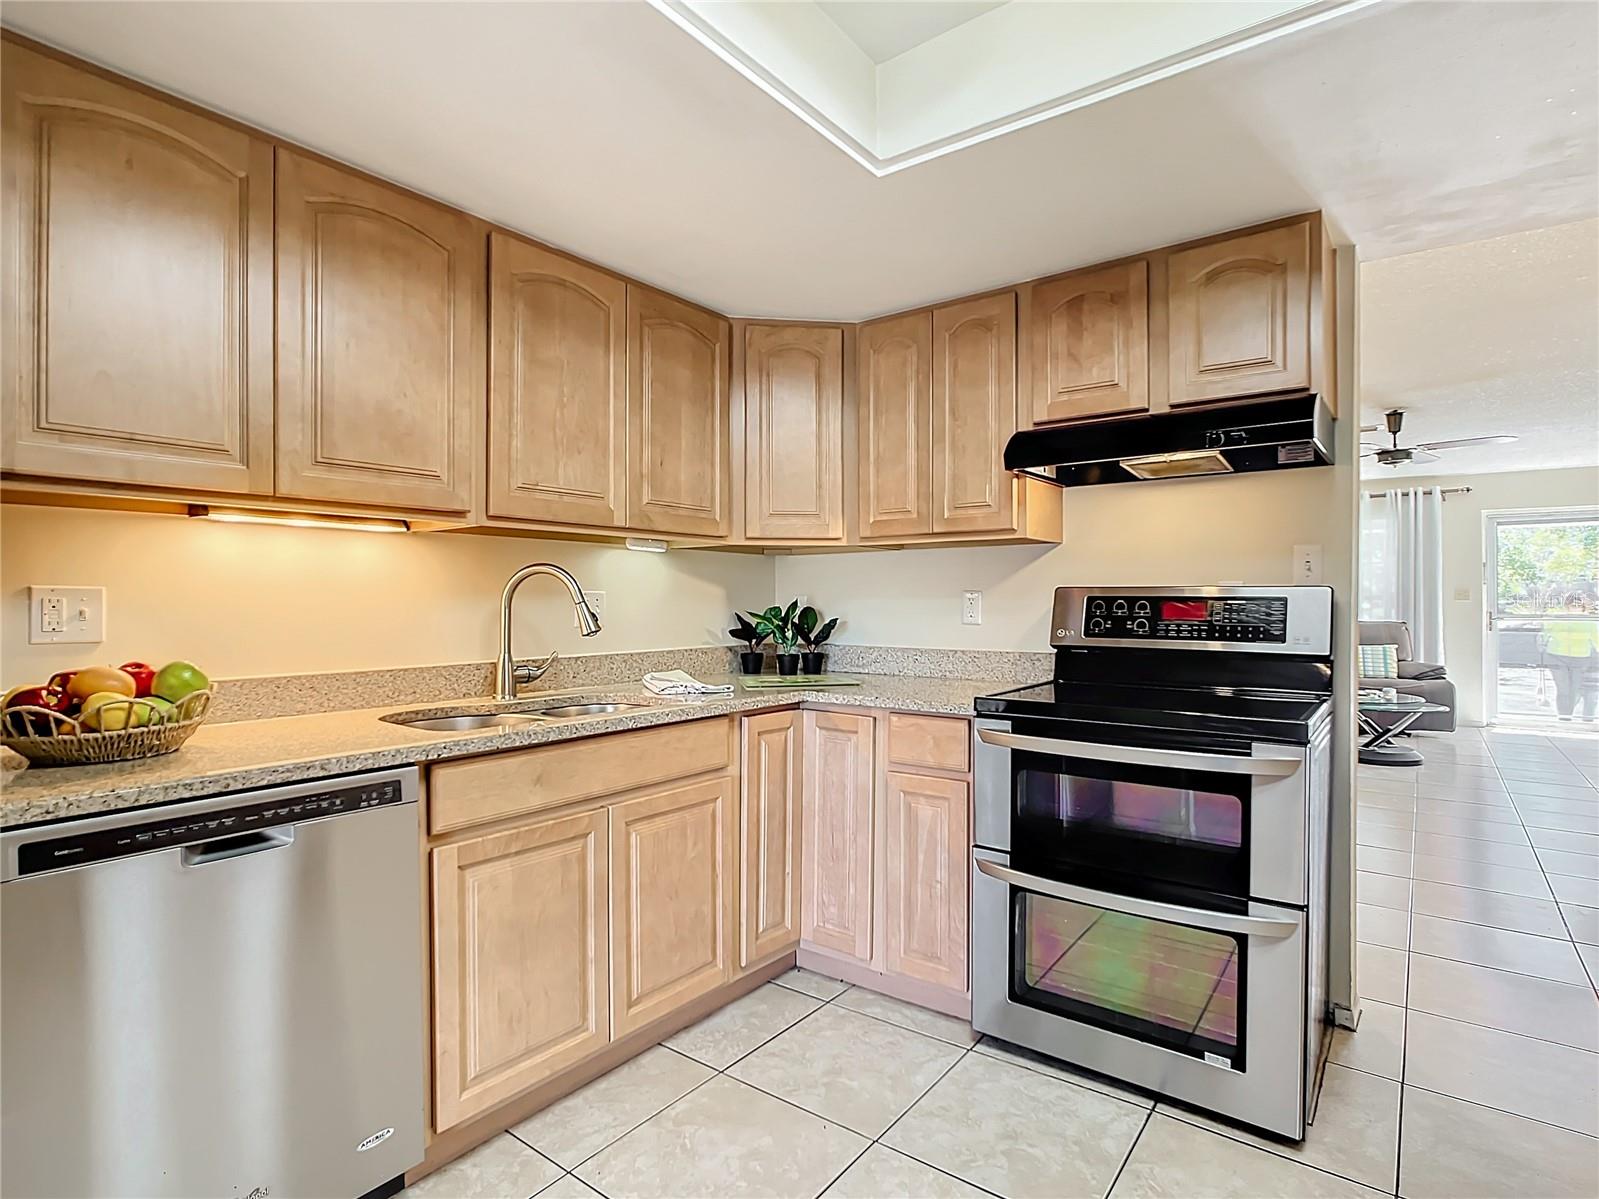 Large, remodeled kitchen with quality wood cabinets and granite counters, under cabinet lighting